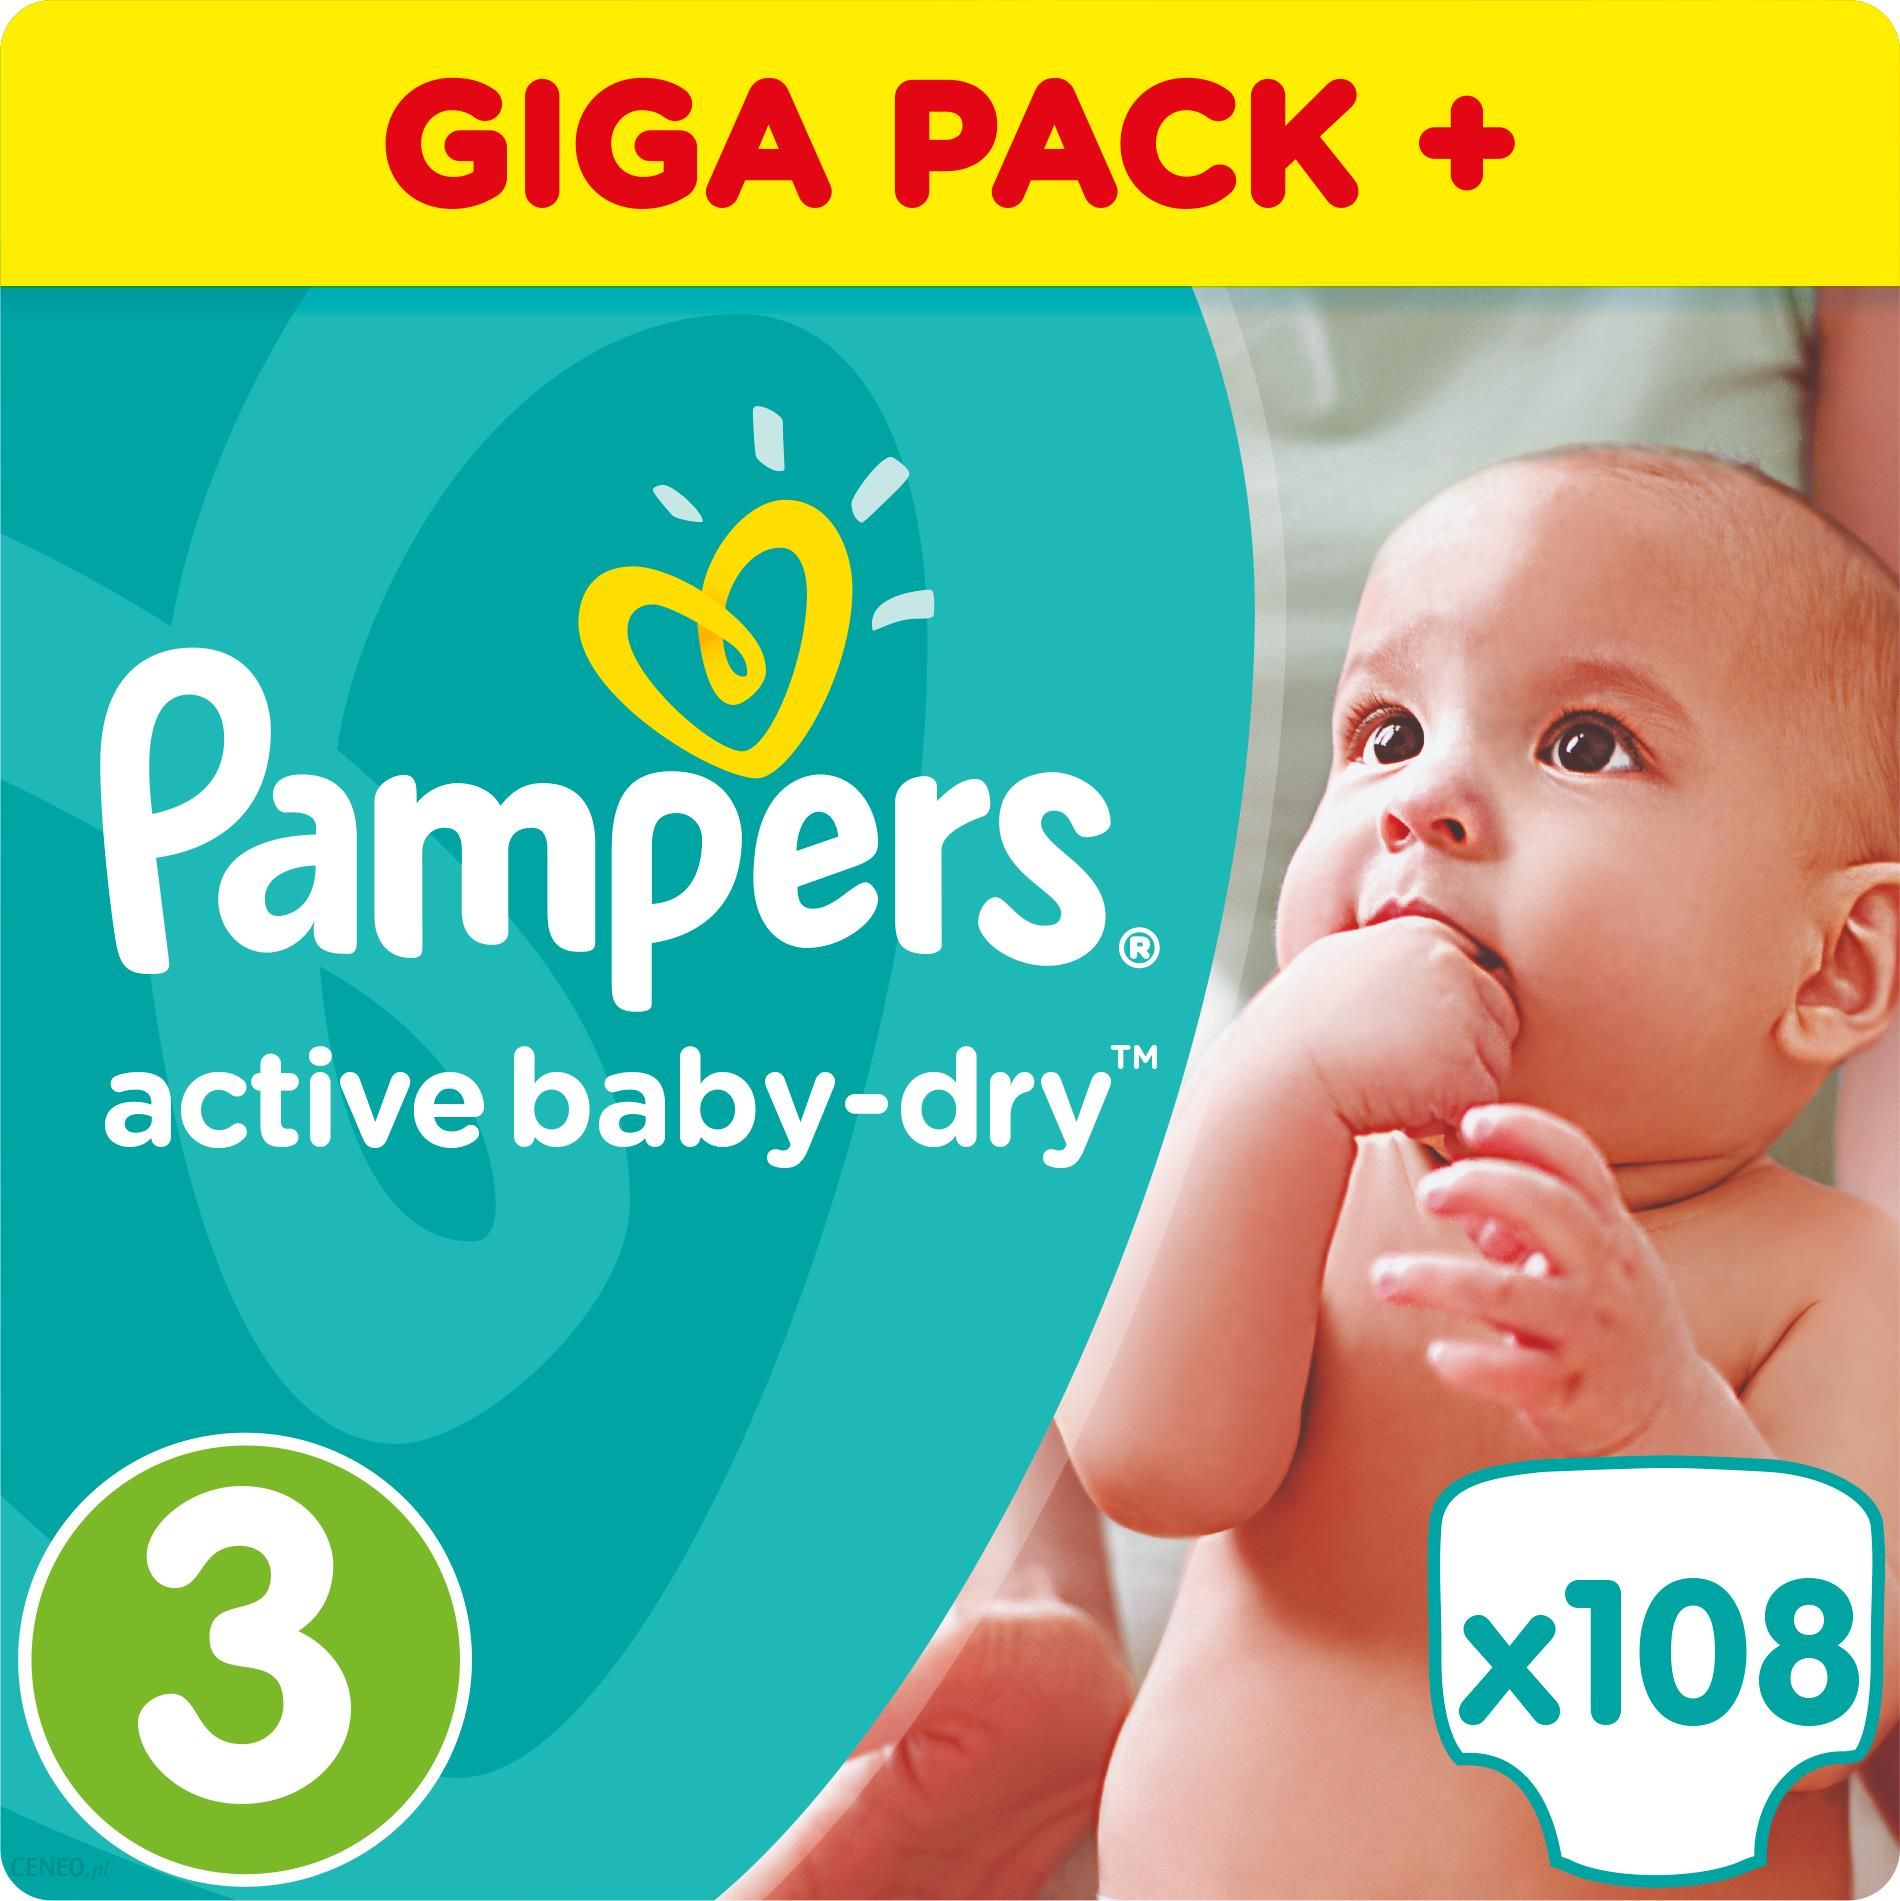 pampers active 3 ceneo